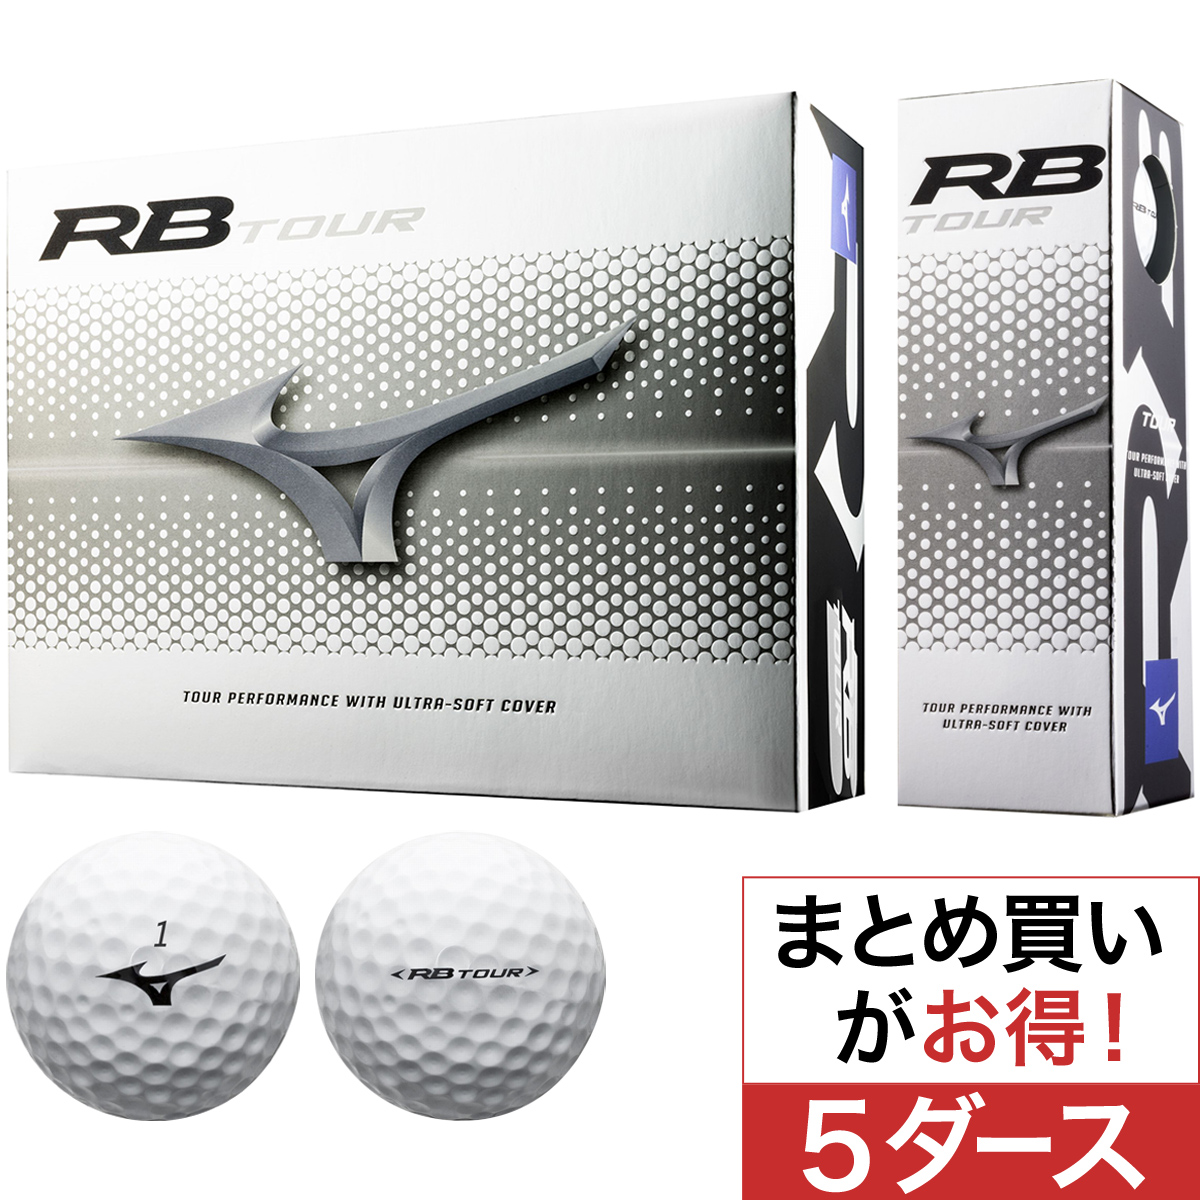  RB TOUR ボール 5ダースセット 